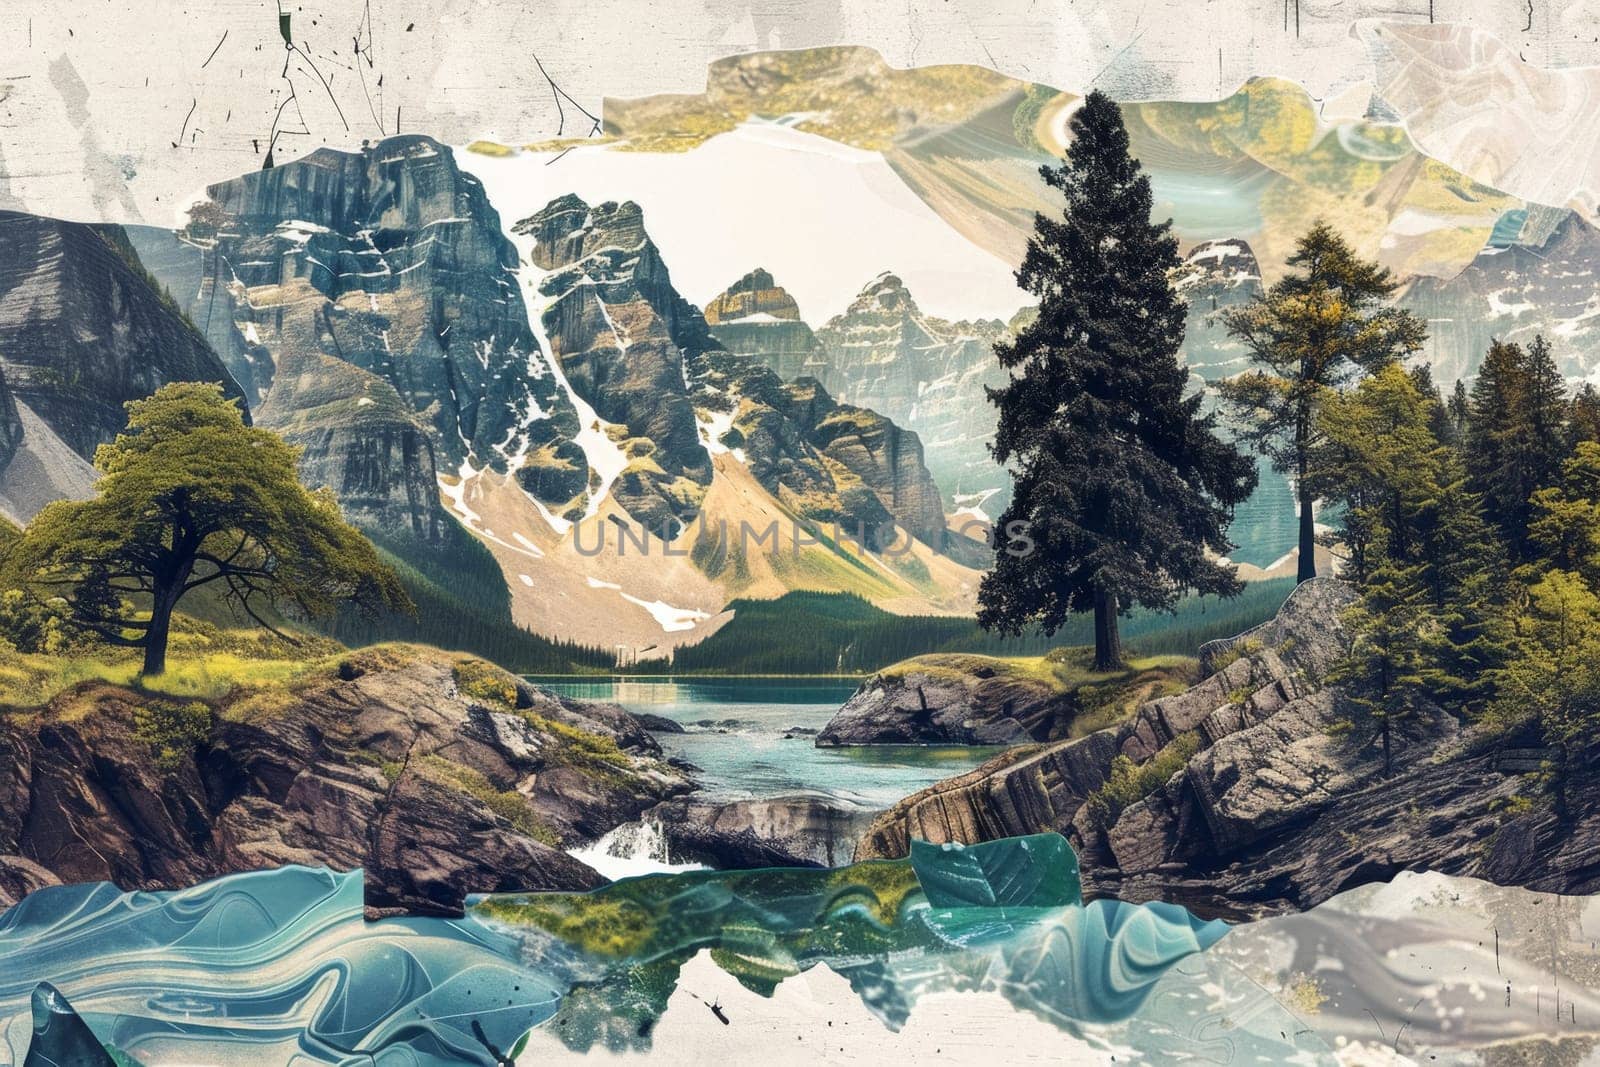 An artful collage depicting a harmonious mix of mountains, forested areas, and water bodies, evoking a sense of peace and natural splendor.